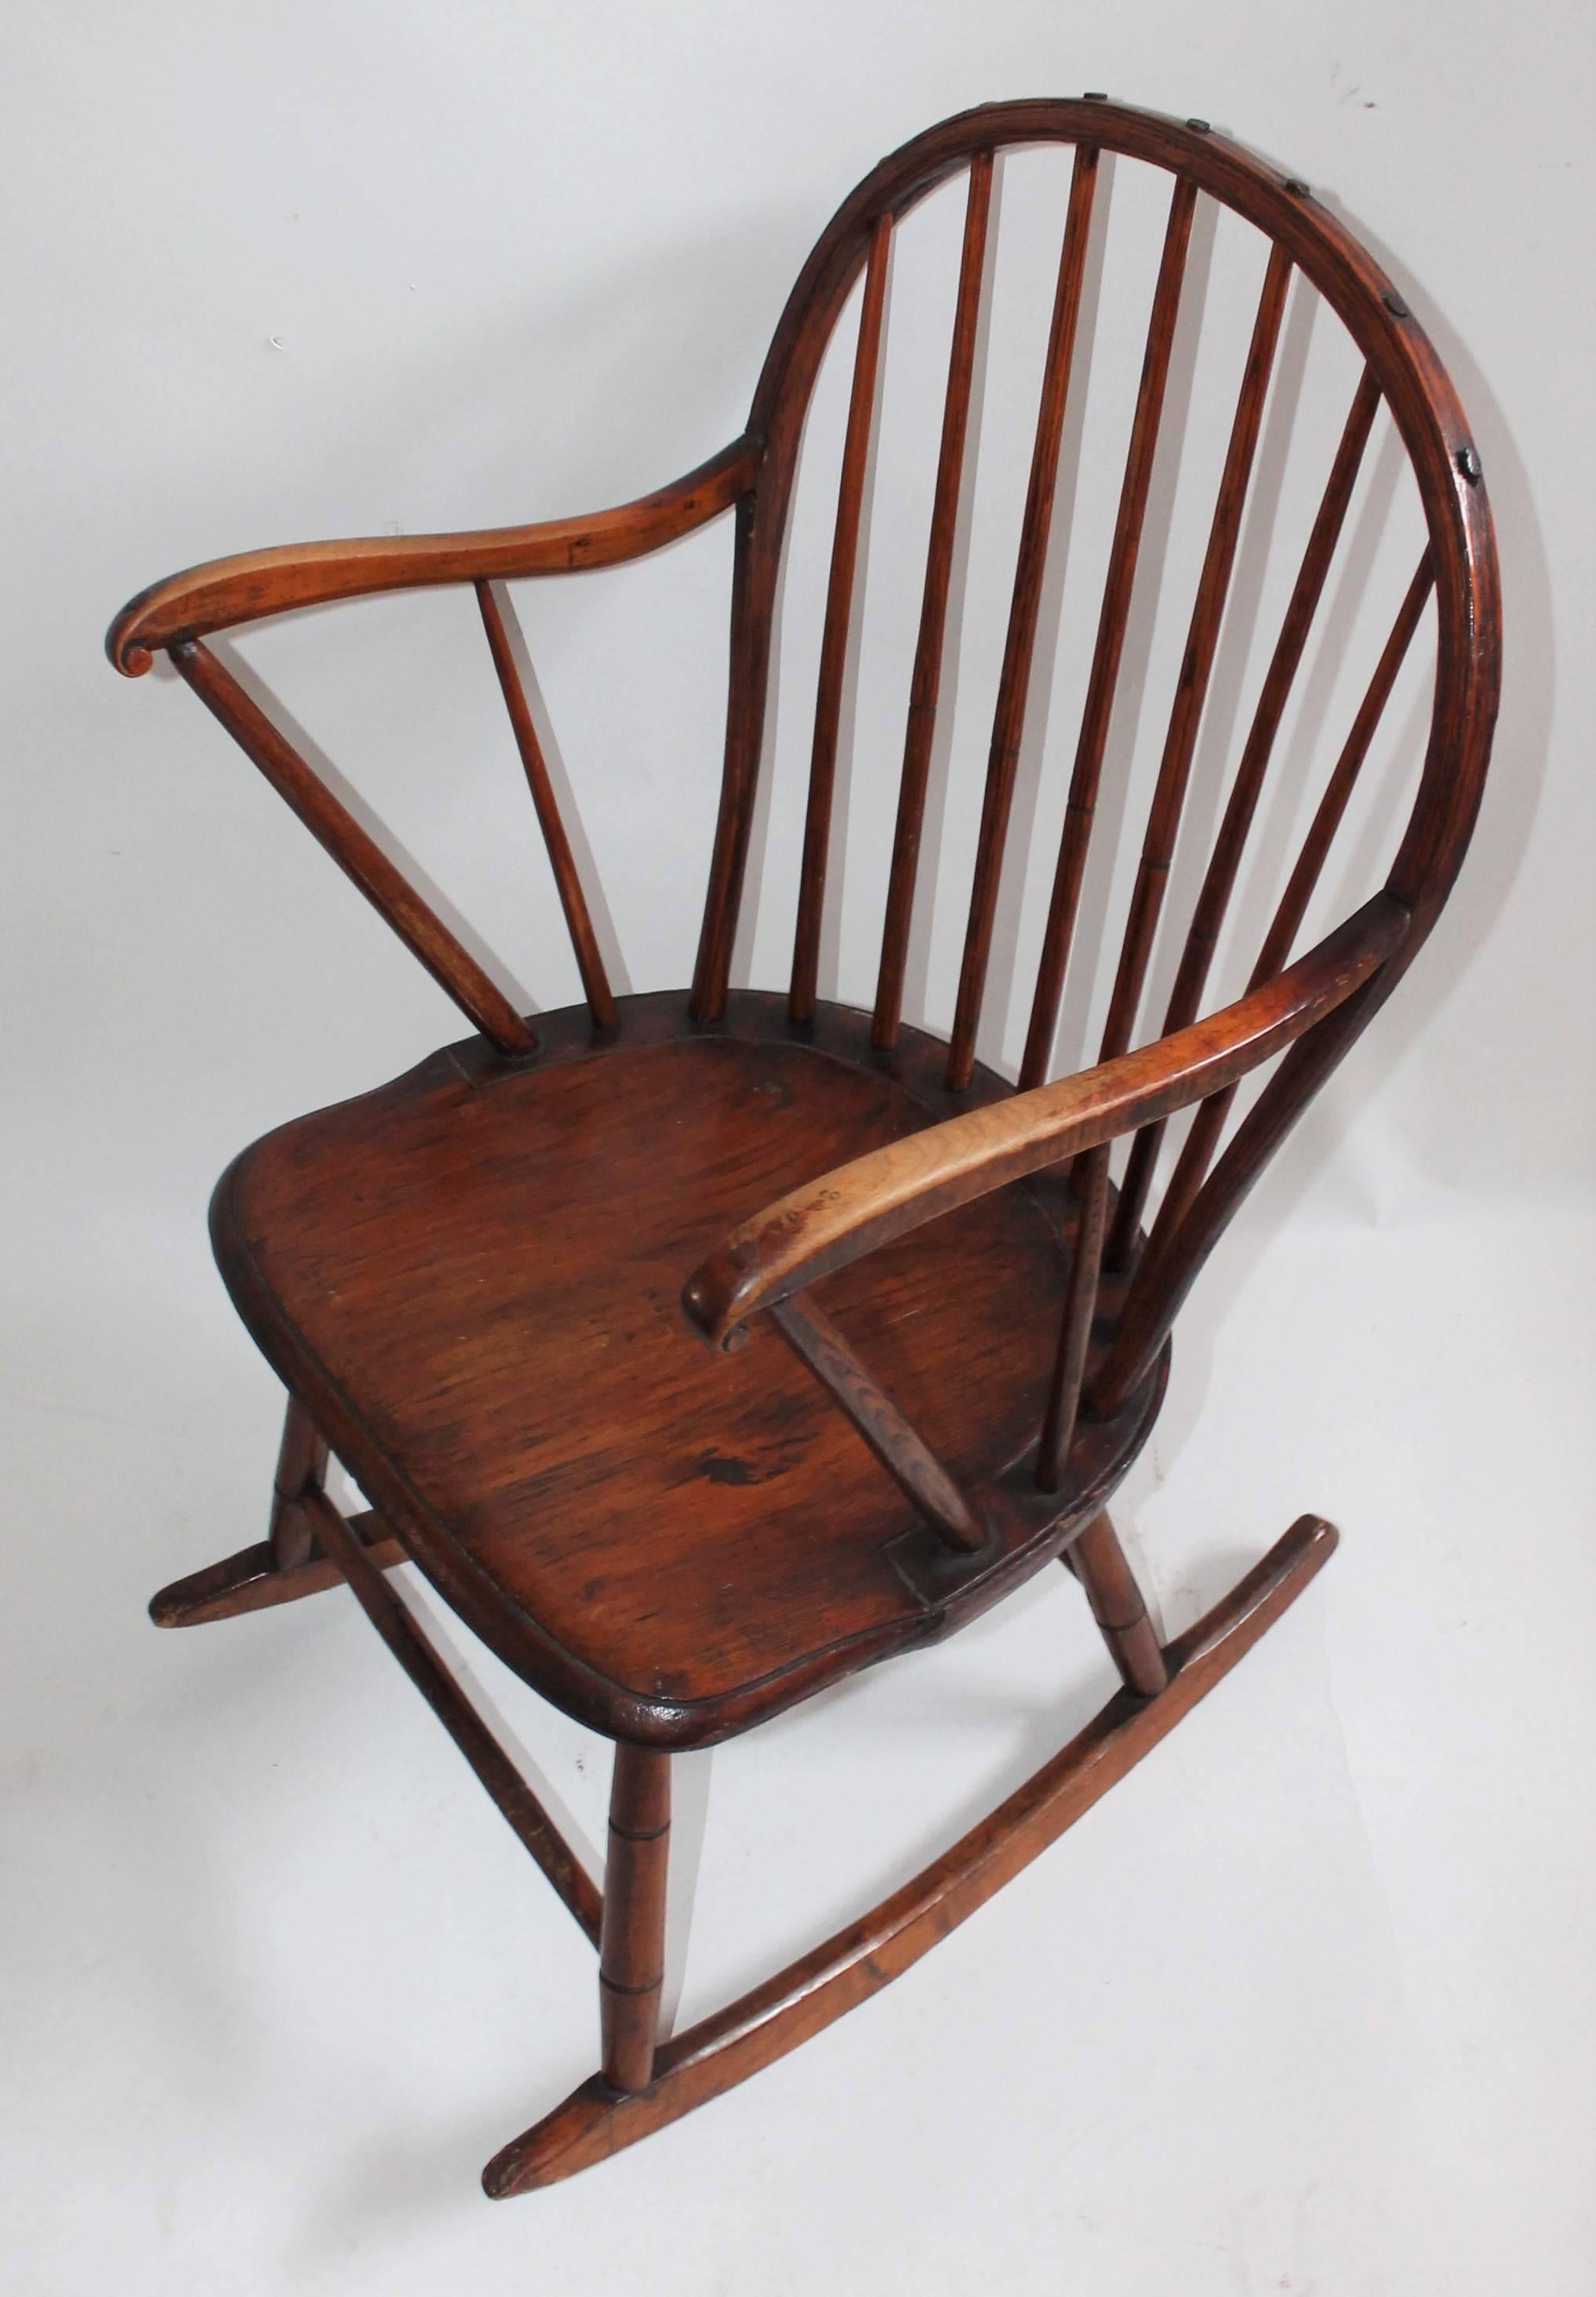 This amazing undisturbed surface rocking chair comes from a private collection and is in pristine as found condition. This stick Windsor rocking chair has bamboo turned legs and great surface.